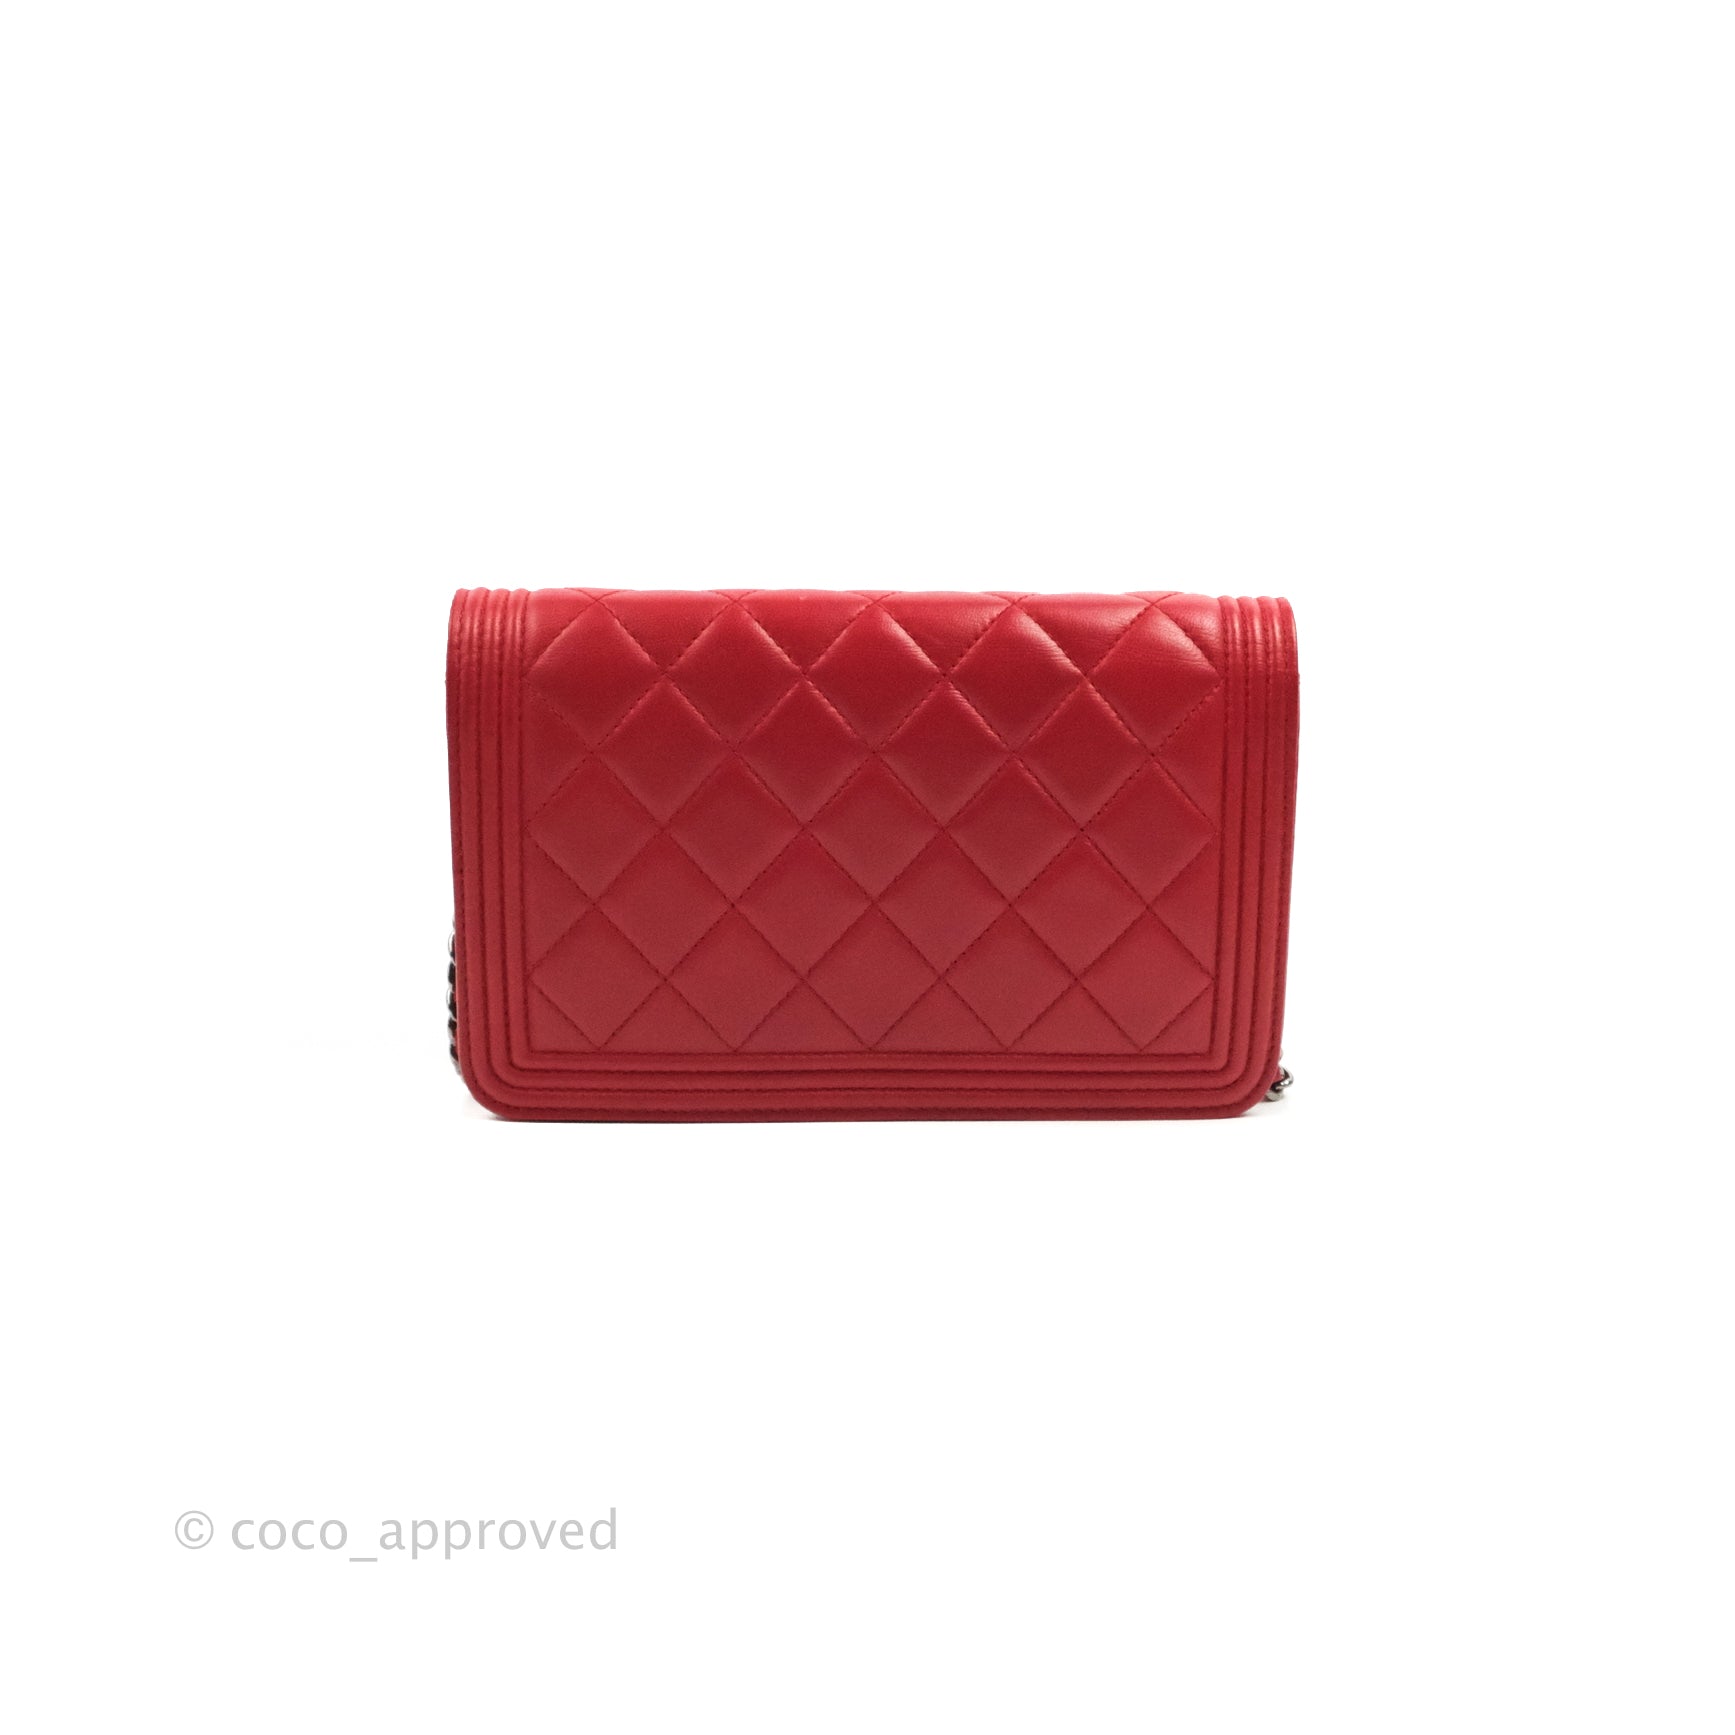 Chanel Red Boy Bag, 100% Certified Authentic